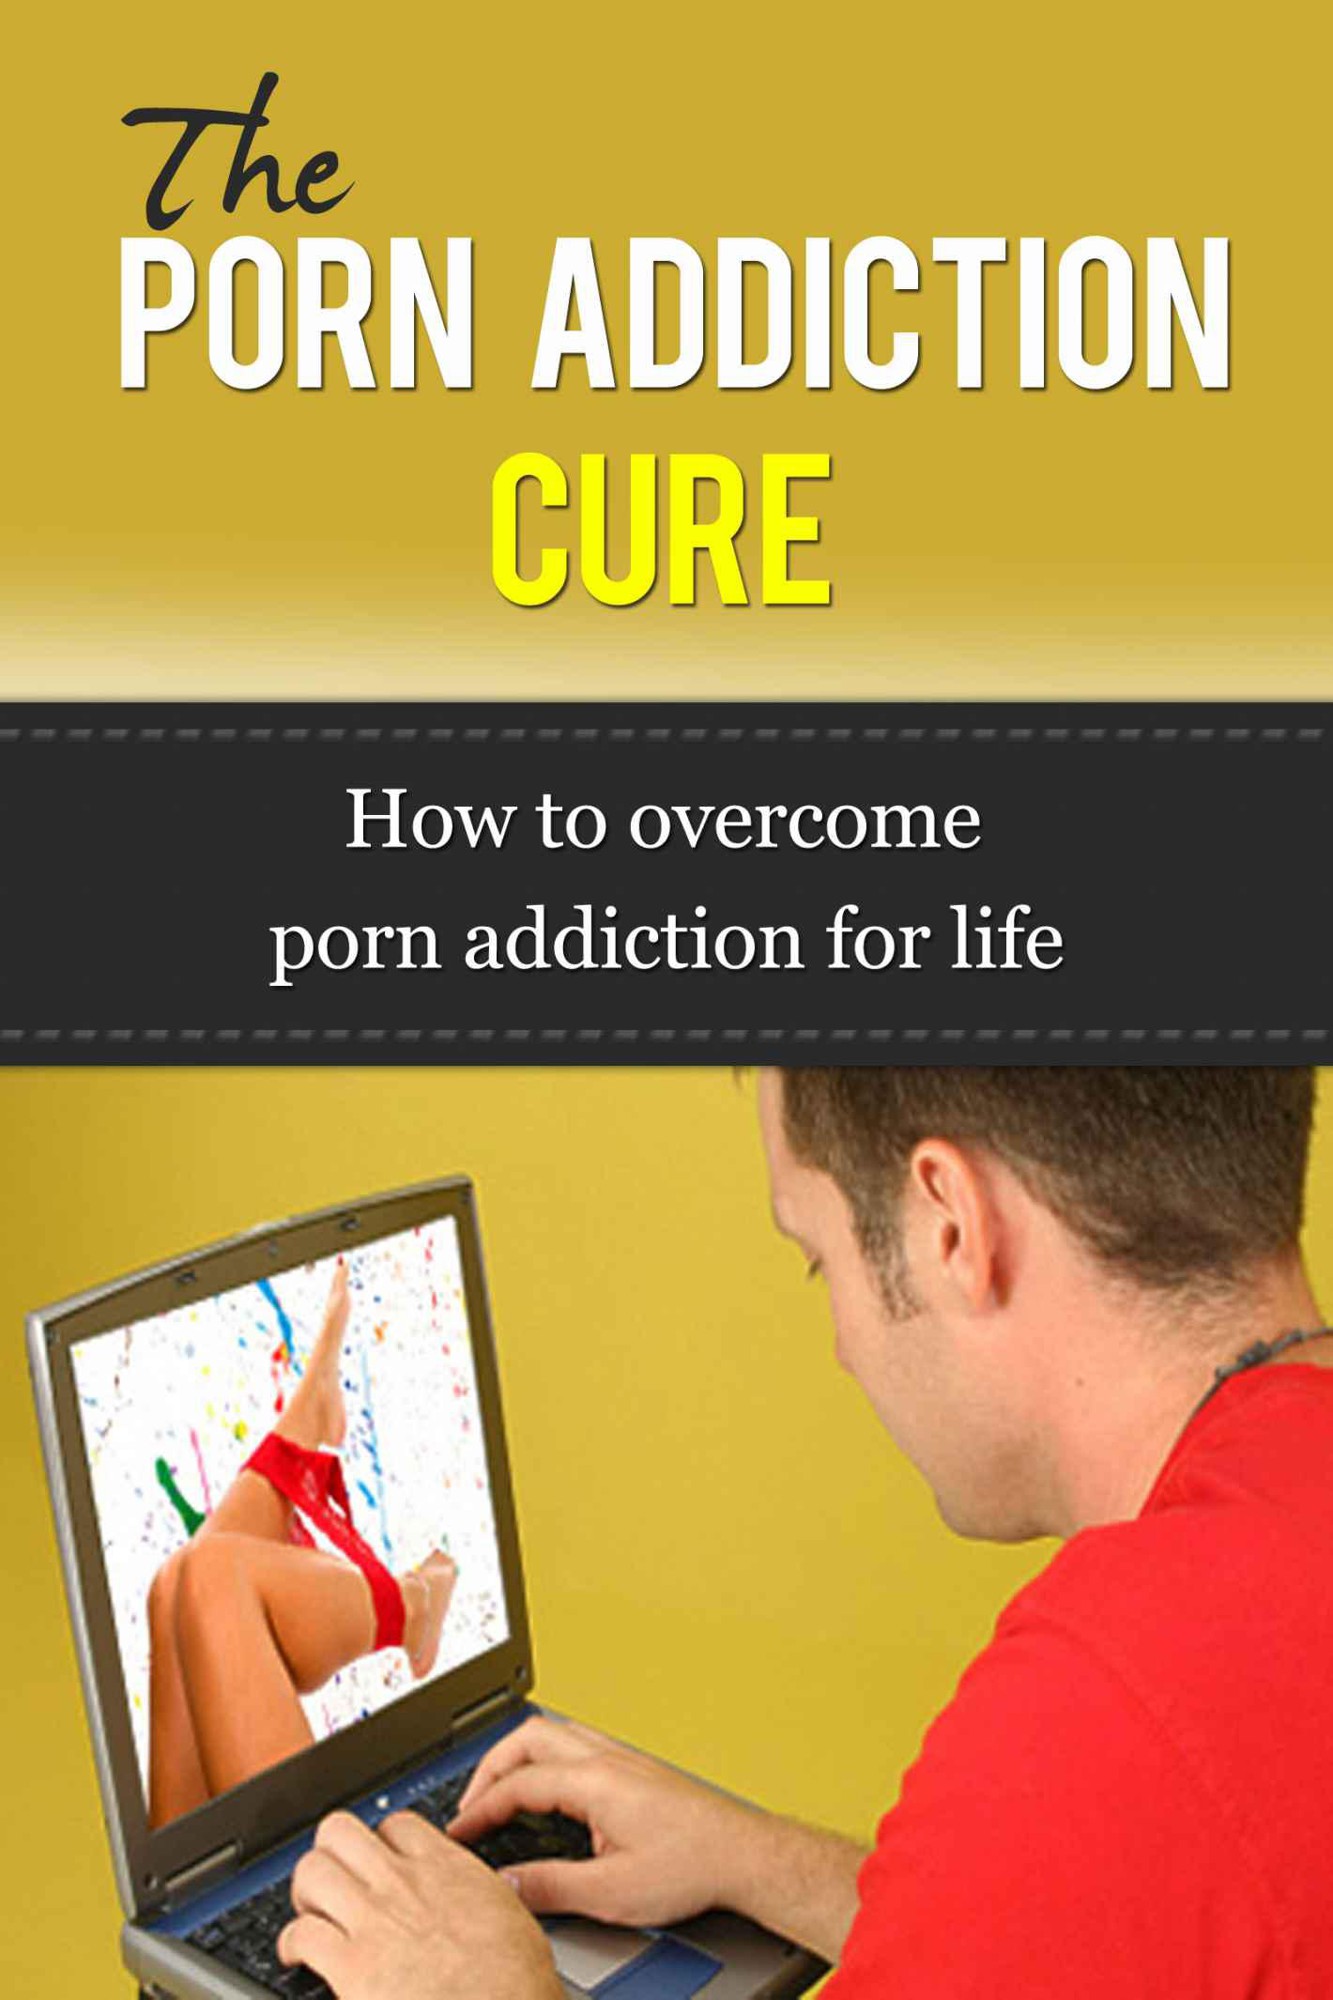 The Porn Addiction Cure - How To Overcome Porn Addiction For Life